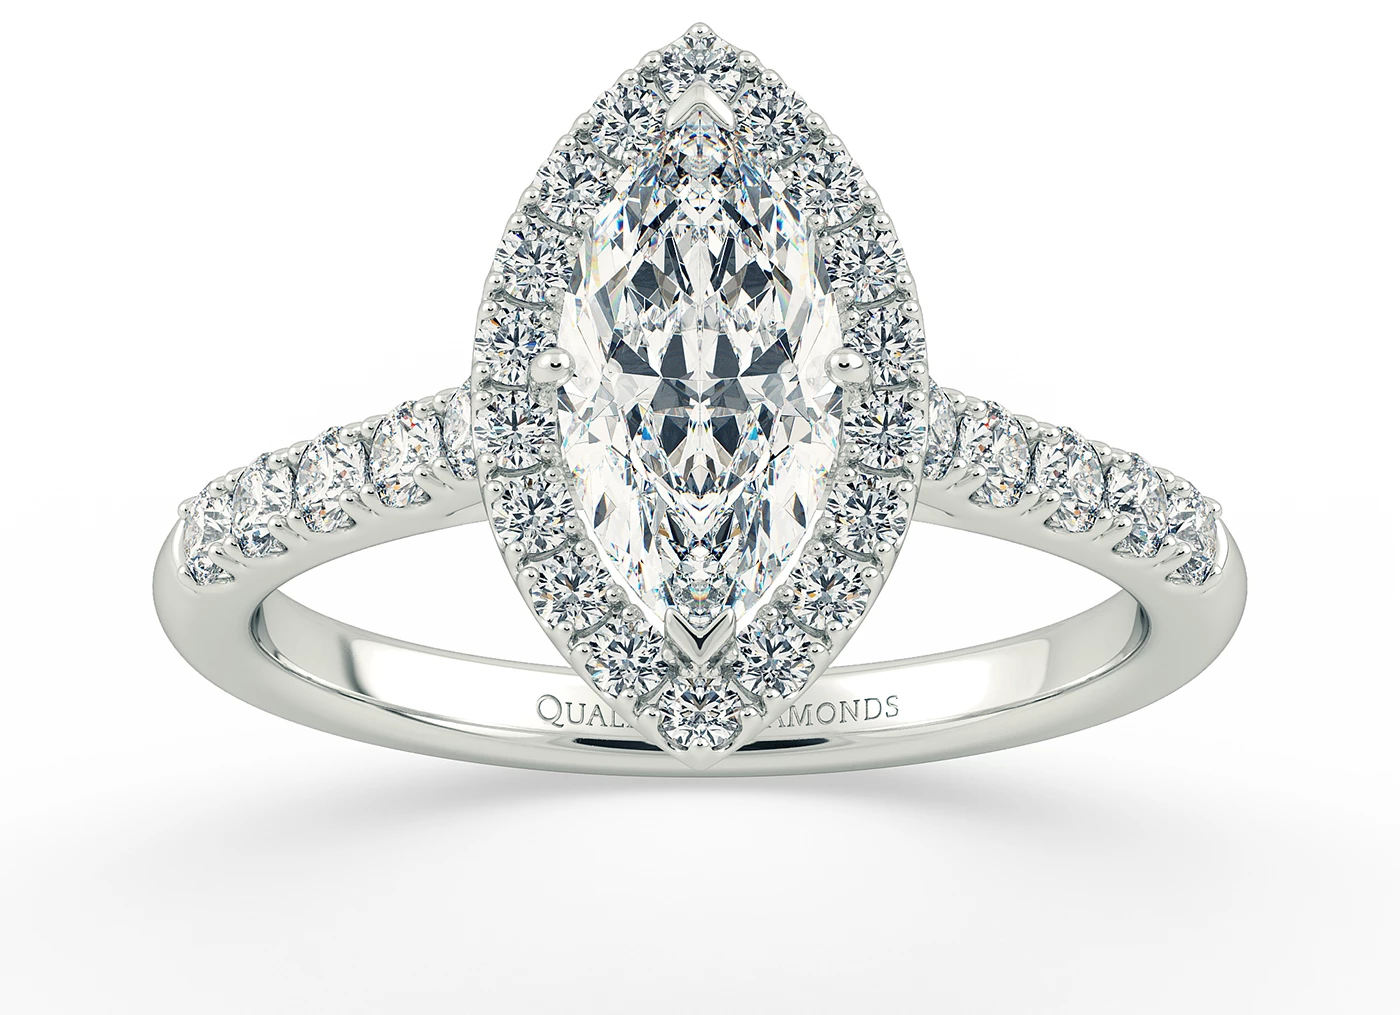 Two Carat Halo Marquise Diamond Ring in 9K White Gold